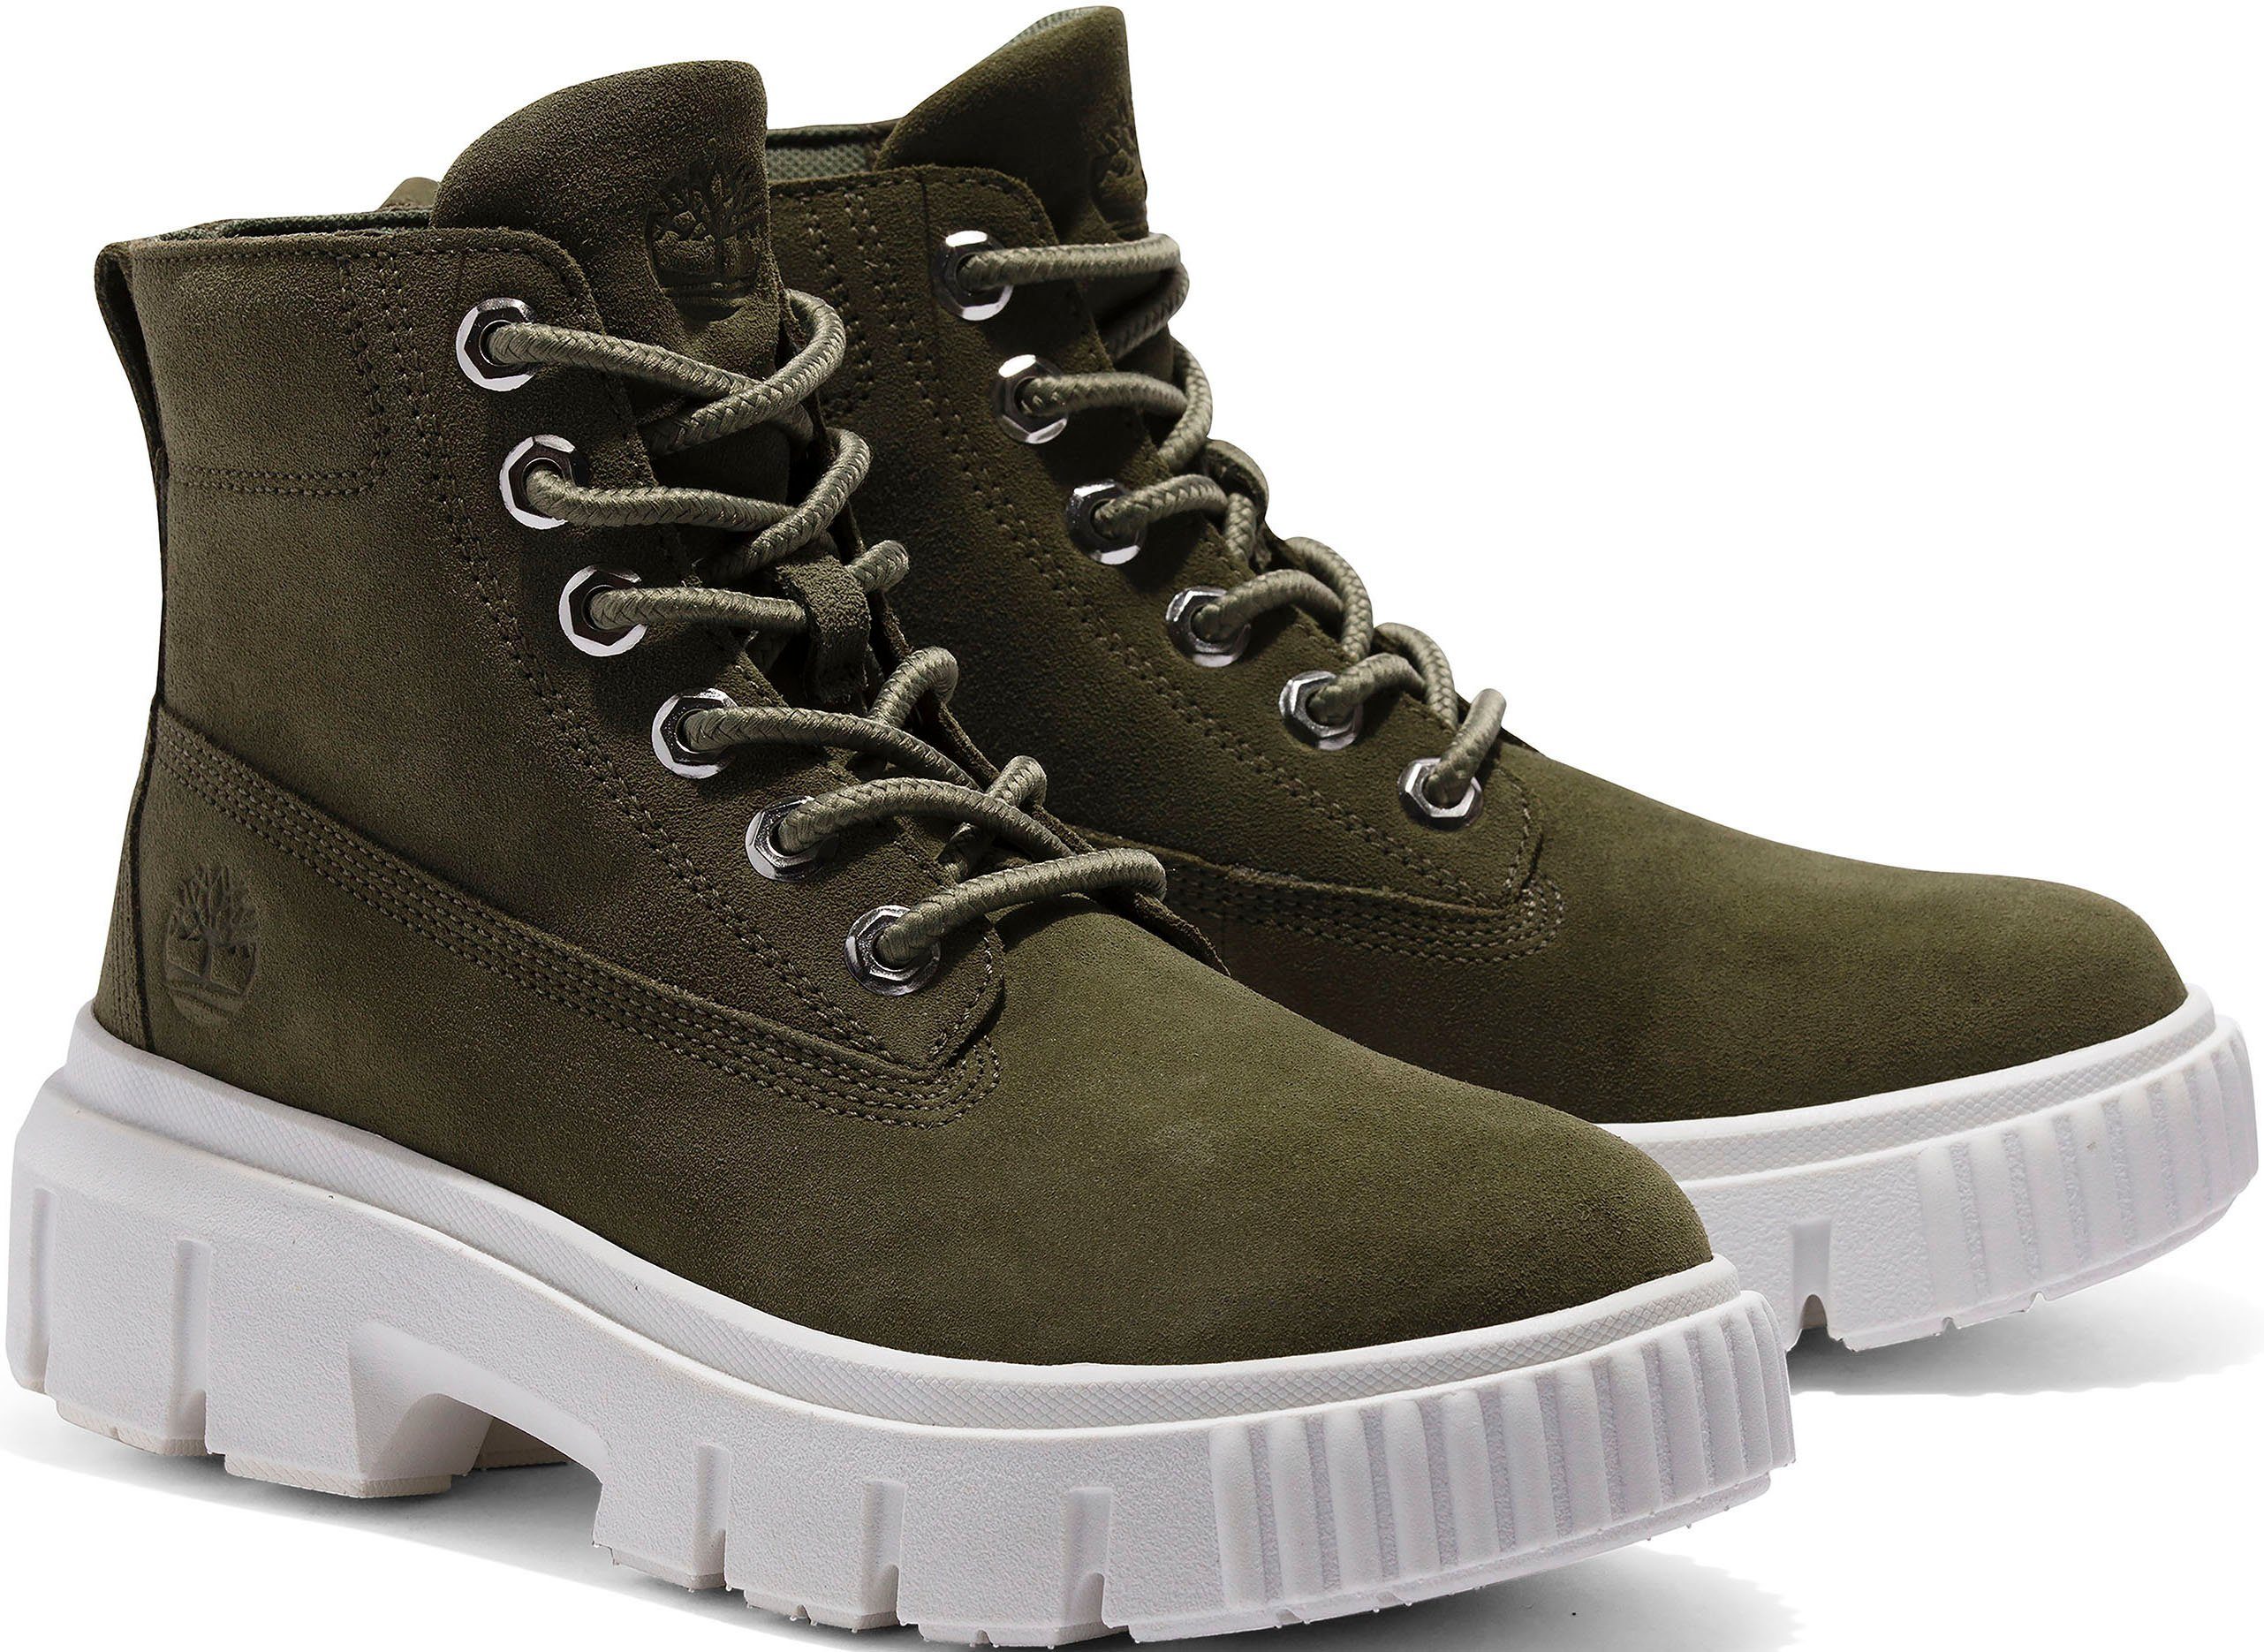 Timberland Greyfield Leather Boot Schnürboots khaki